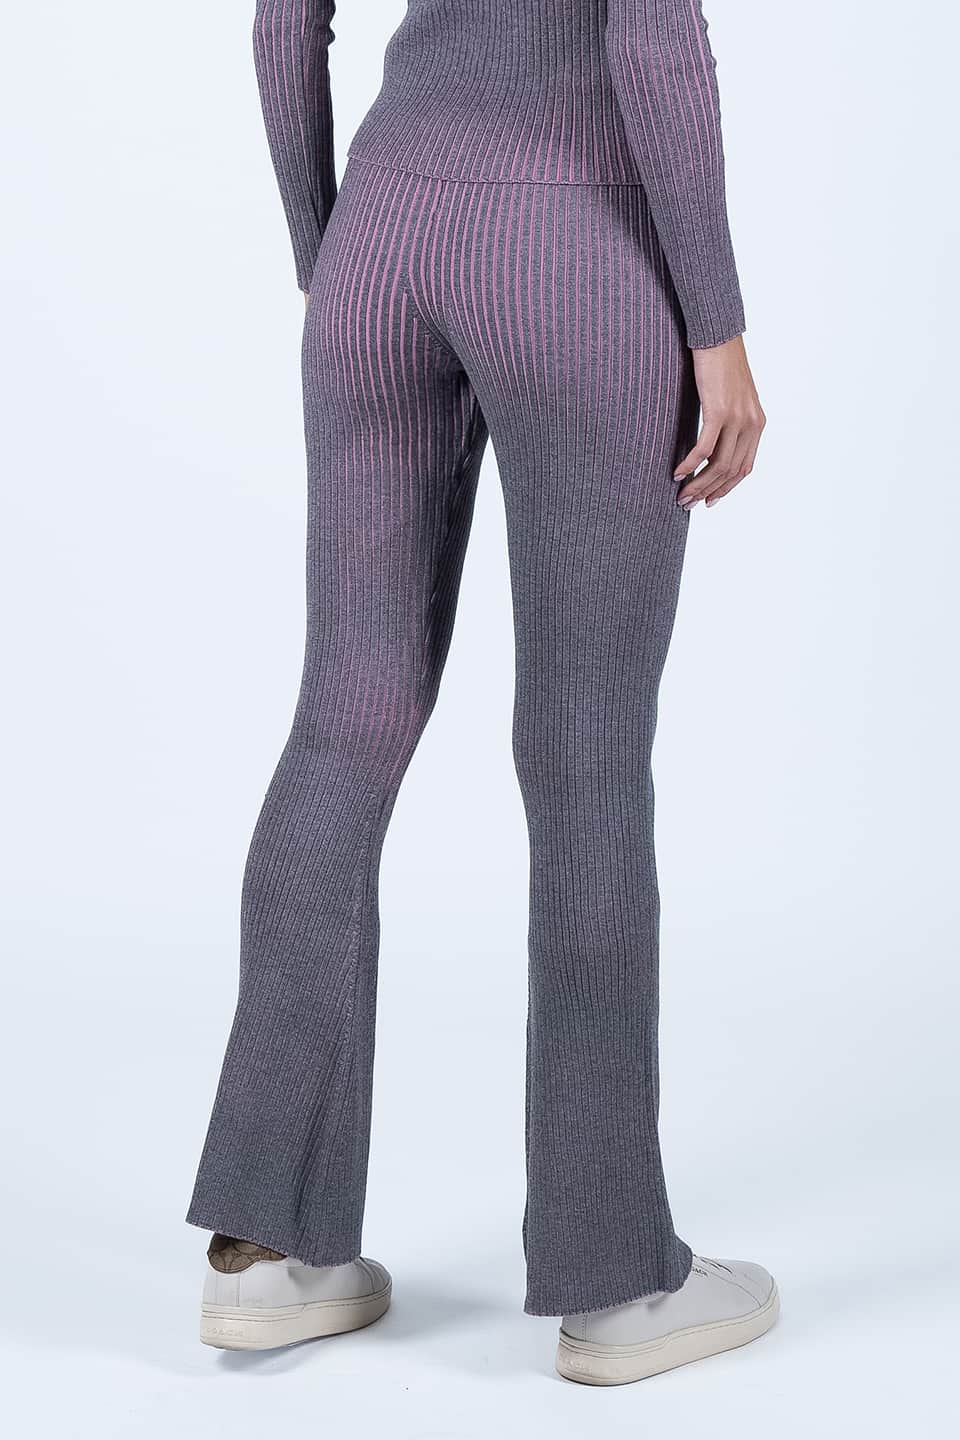 Designer Pink Women pants, shop online with free delivery in UAE. Product gallery 4